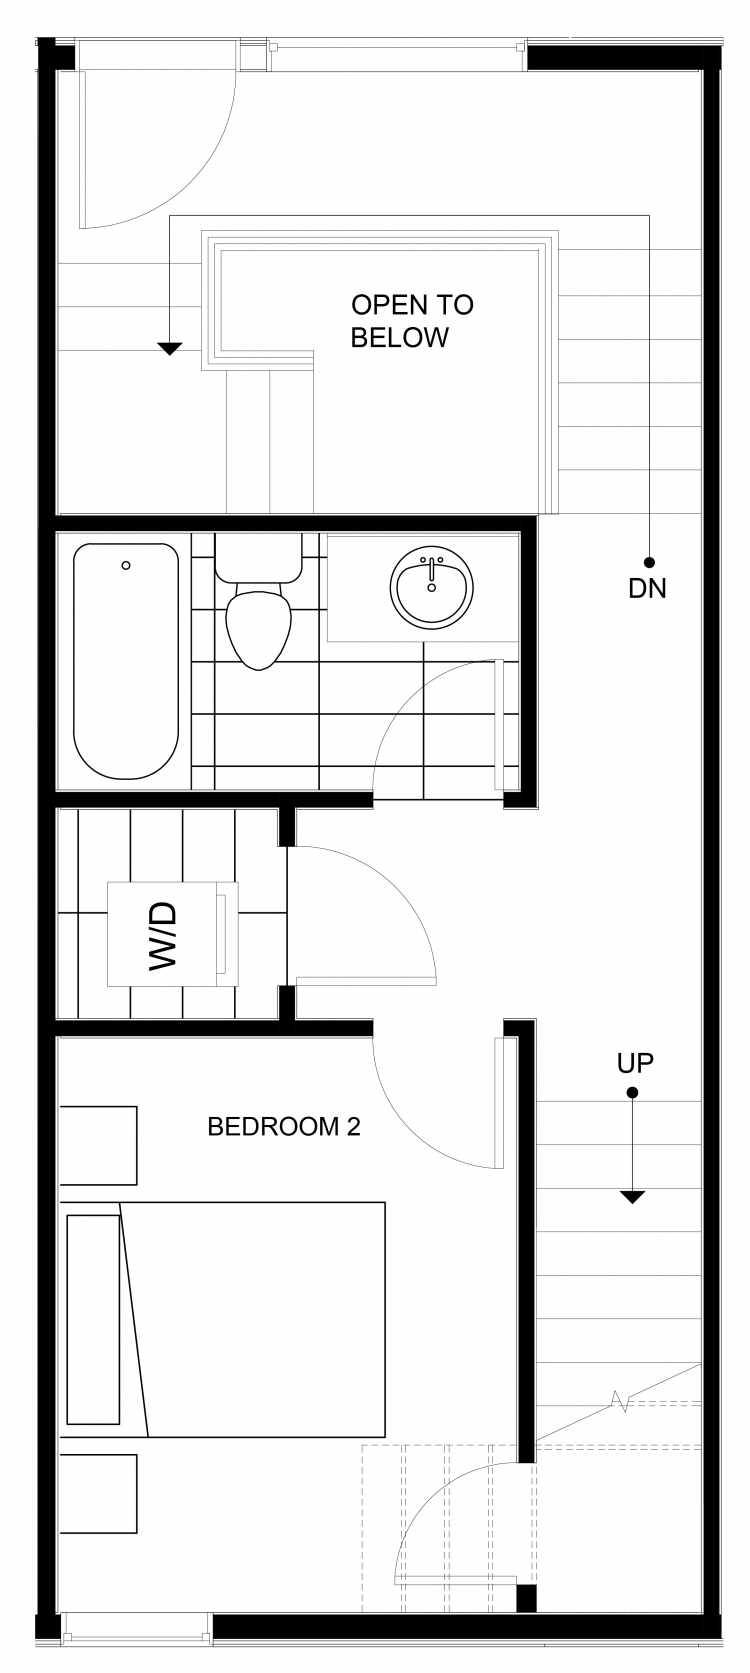 Second Floor Plan of 1541 Grandview Pl E, One of the Grandview Townhomes in Capitol Hill